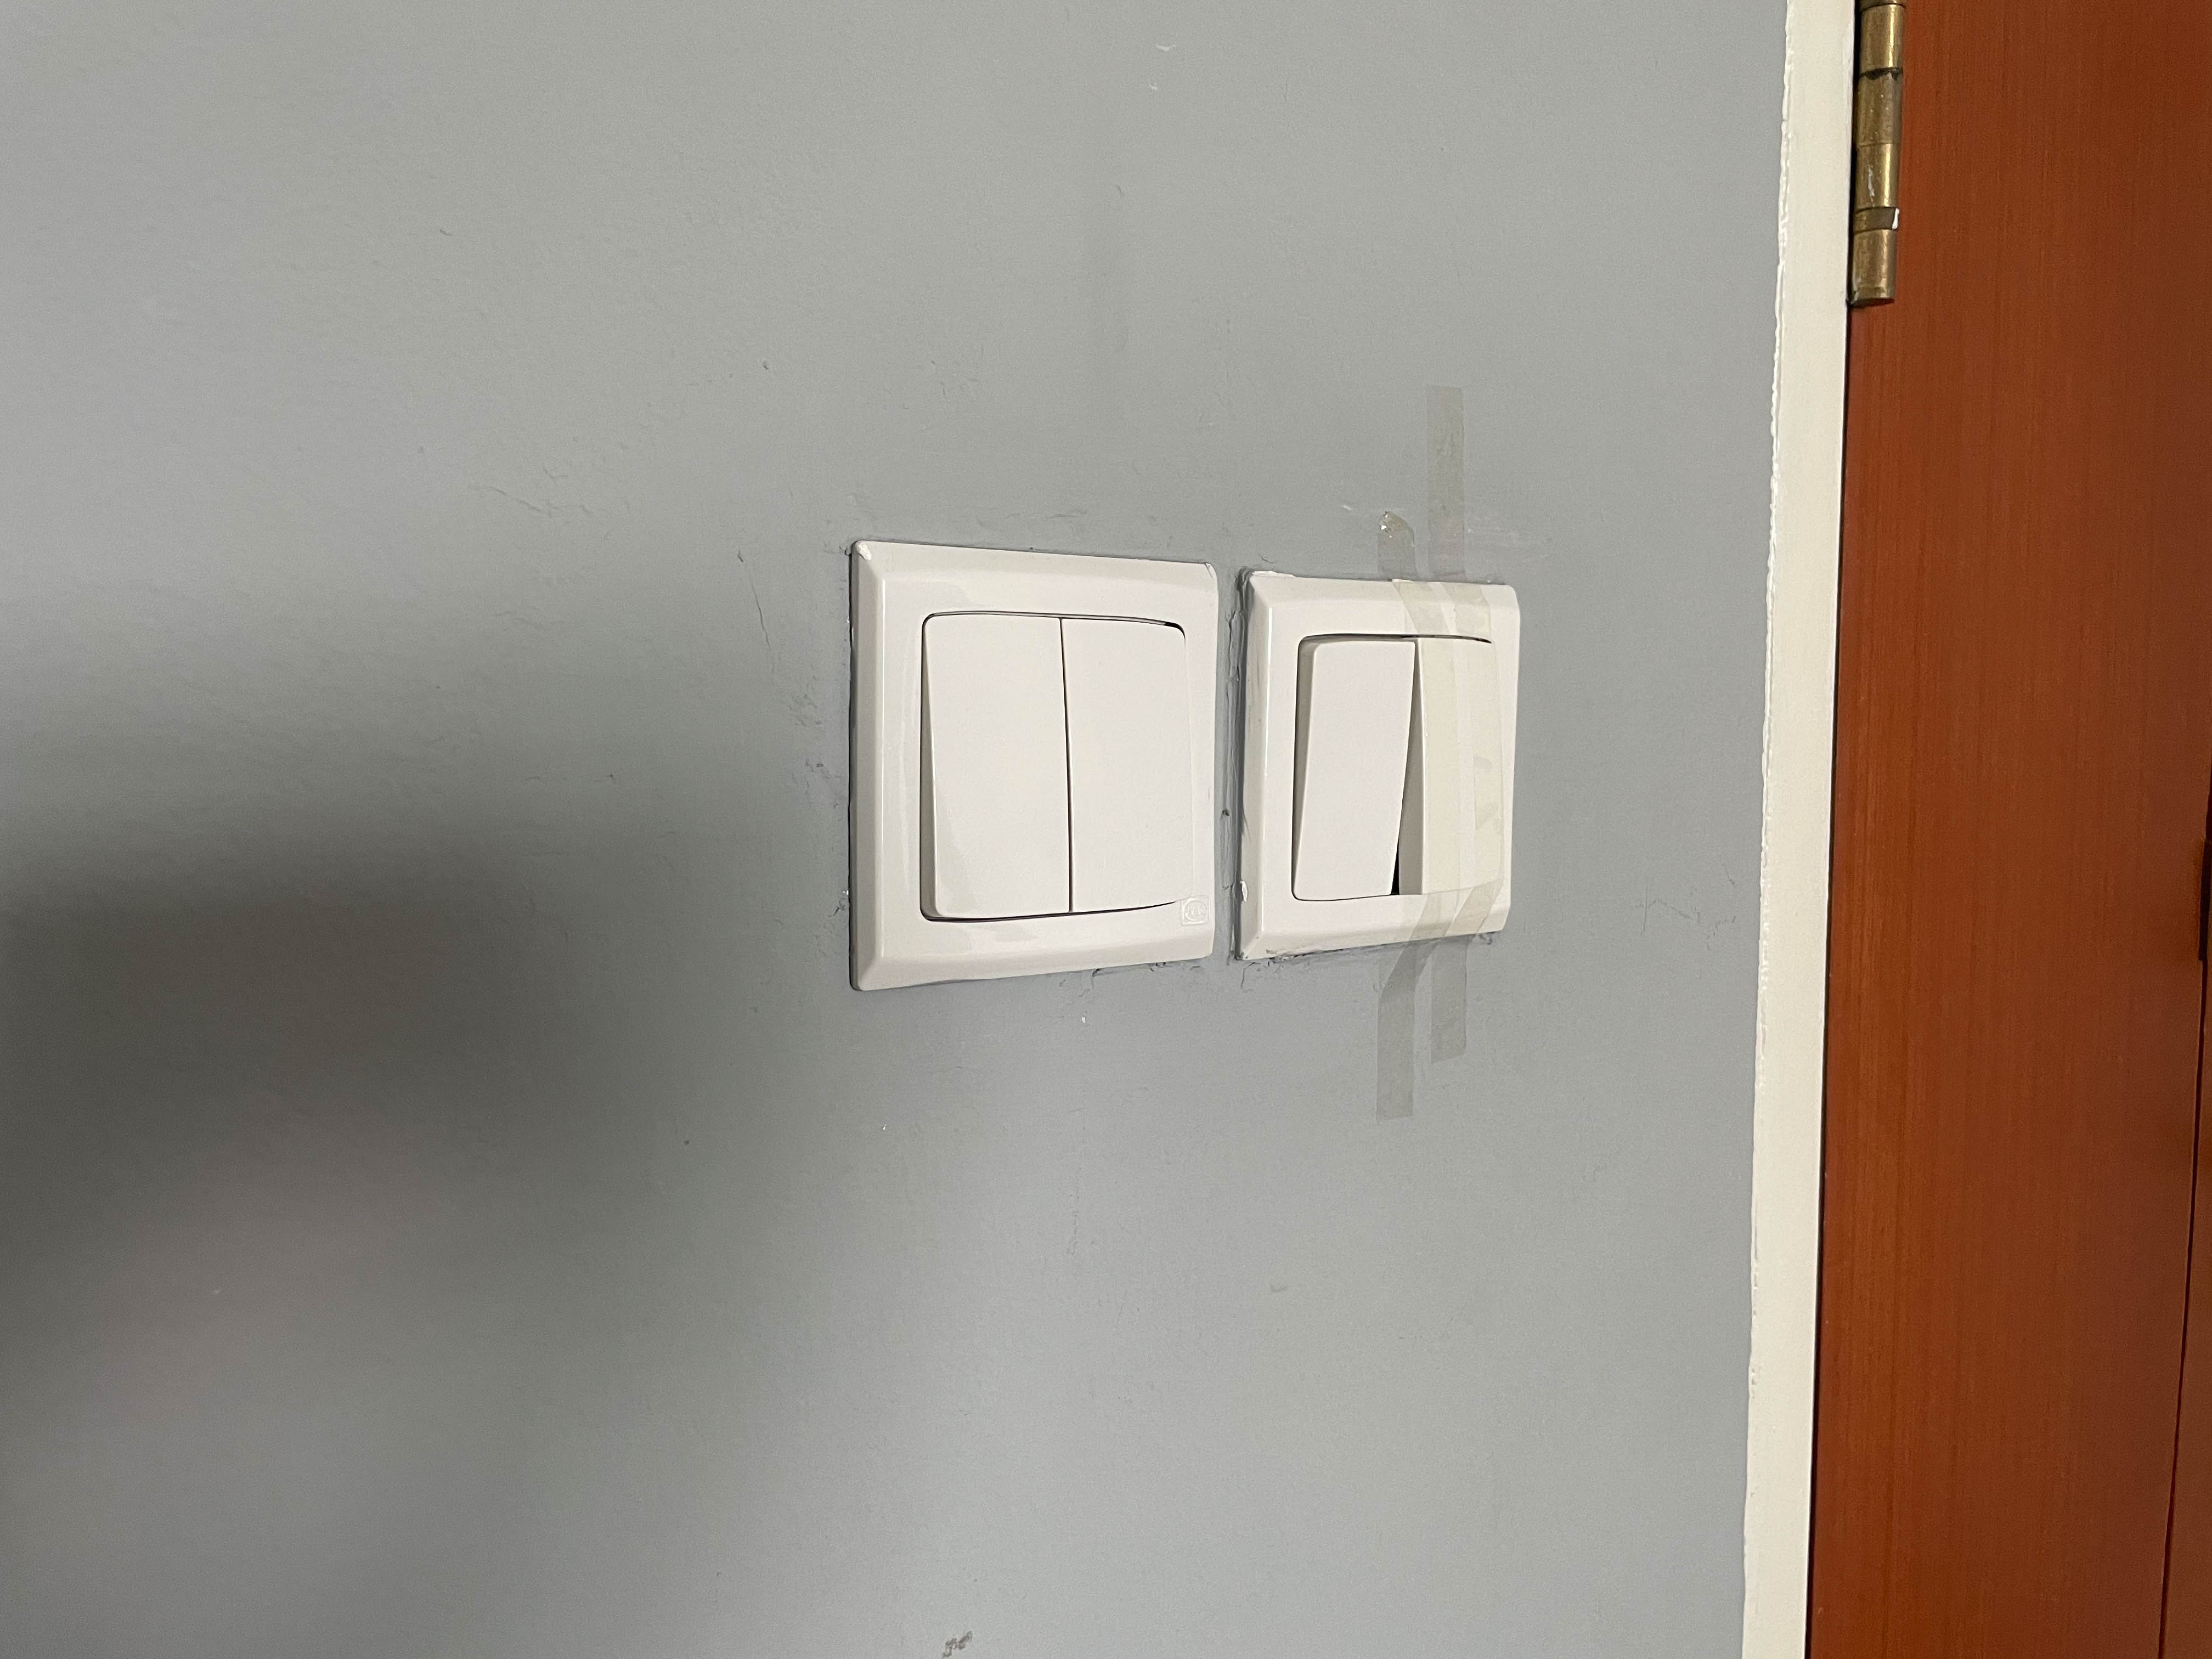 A switch that was taped up because it is broken